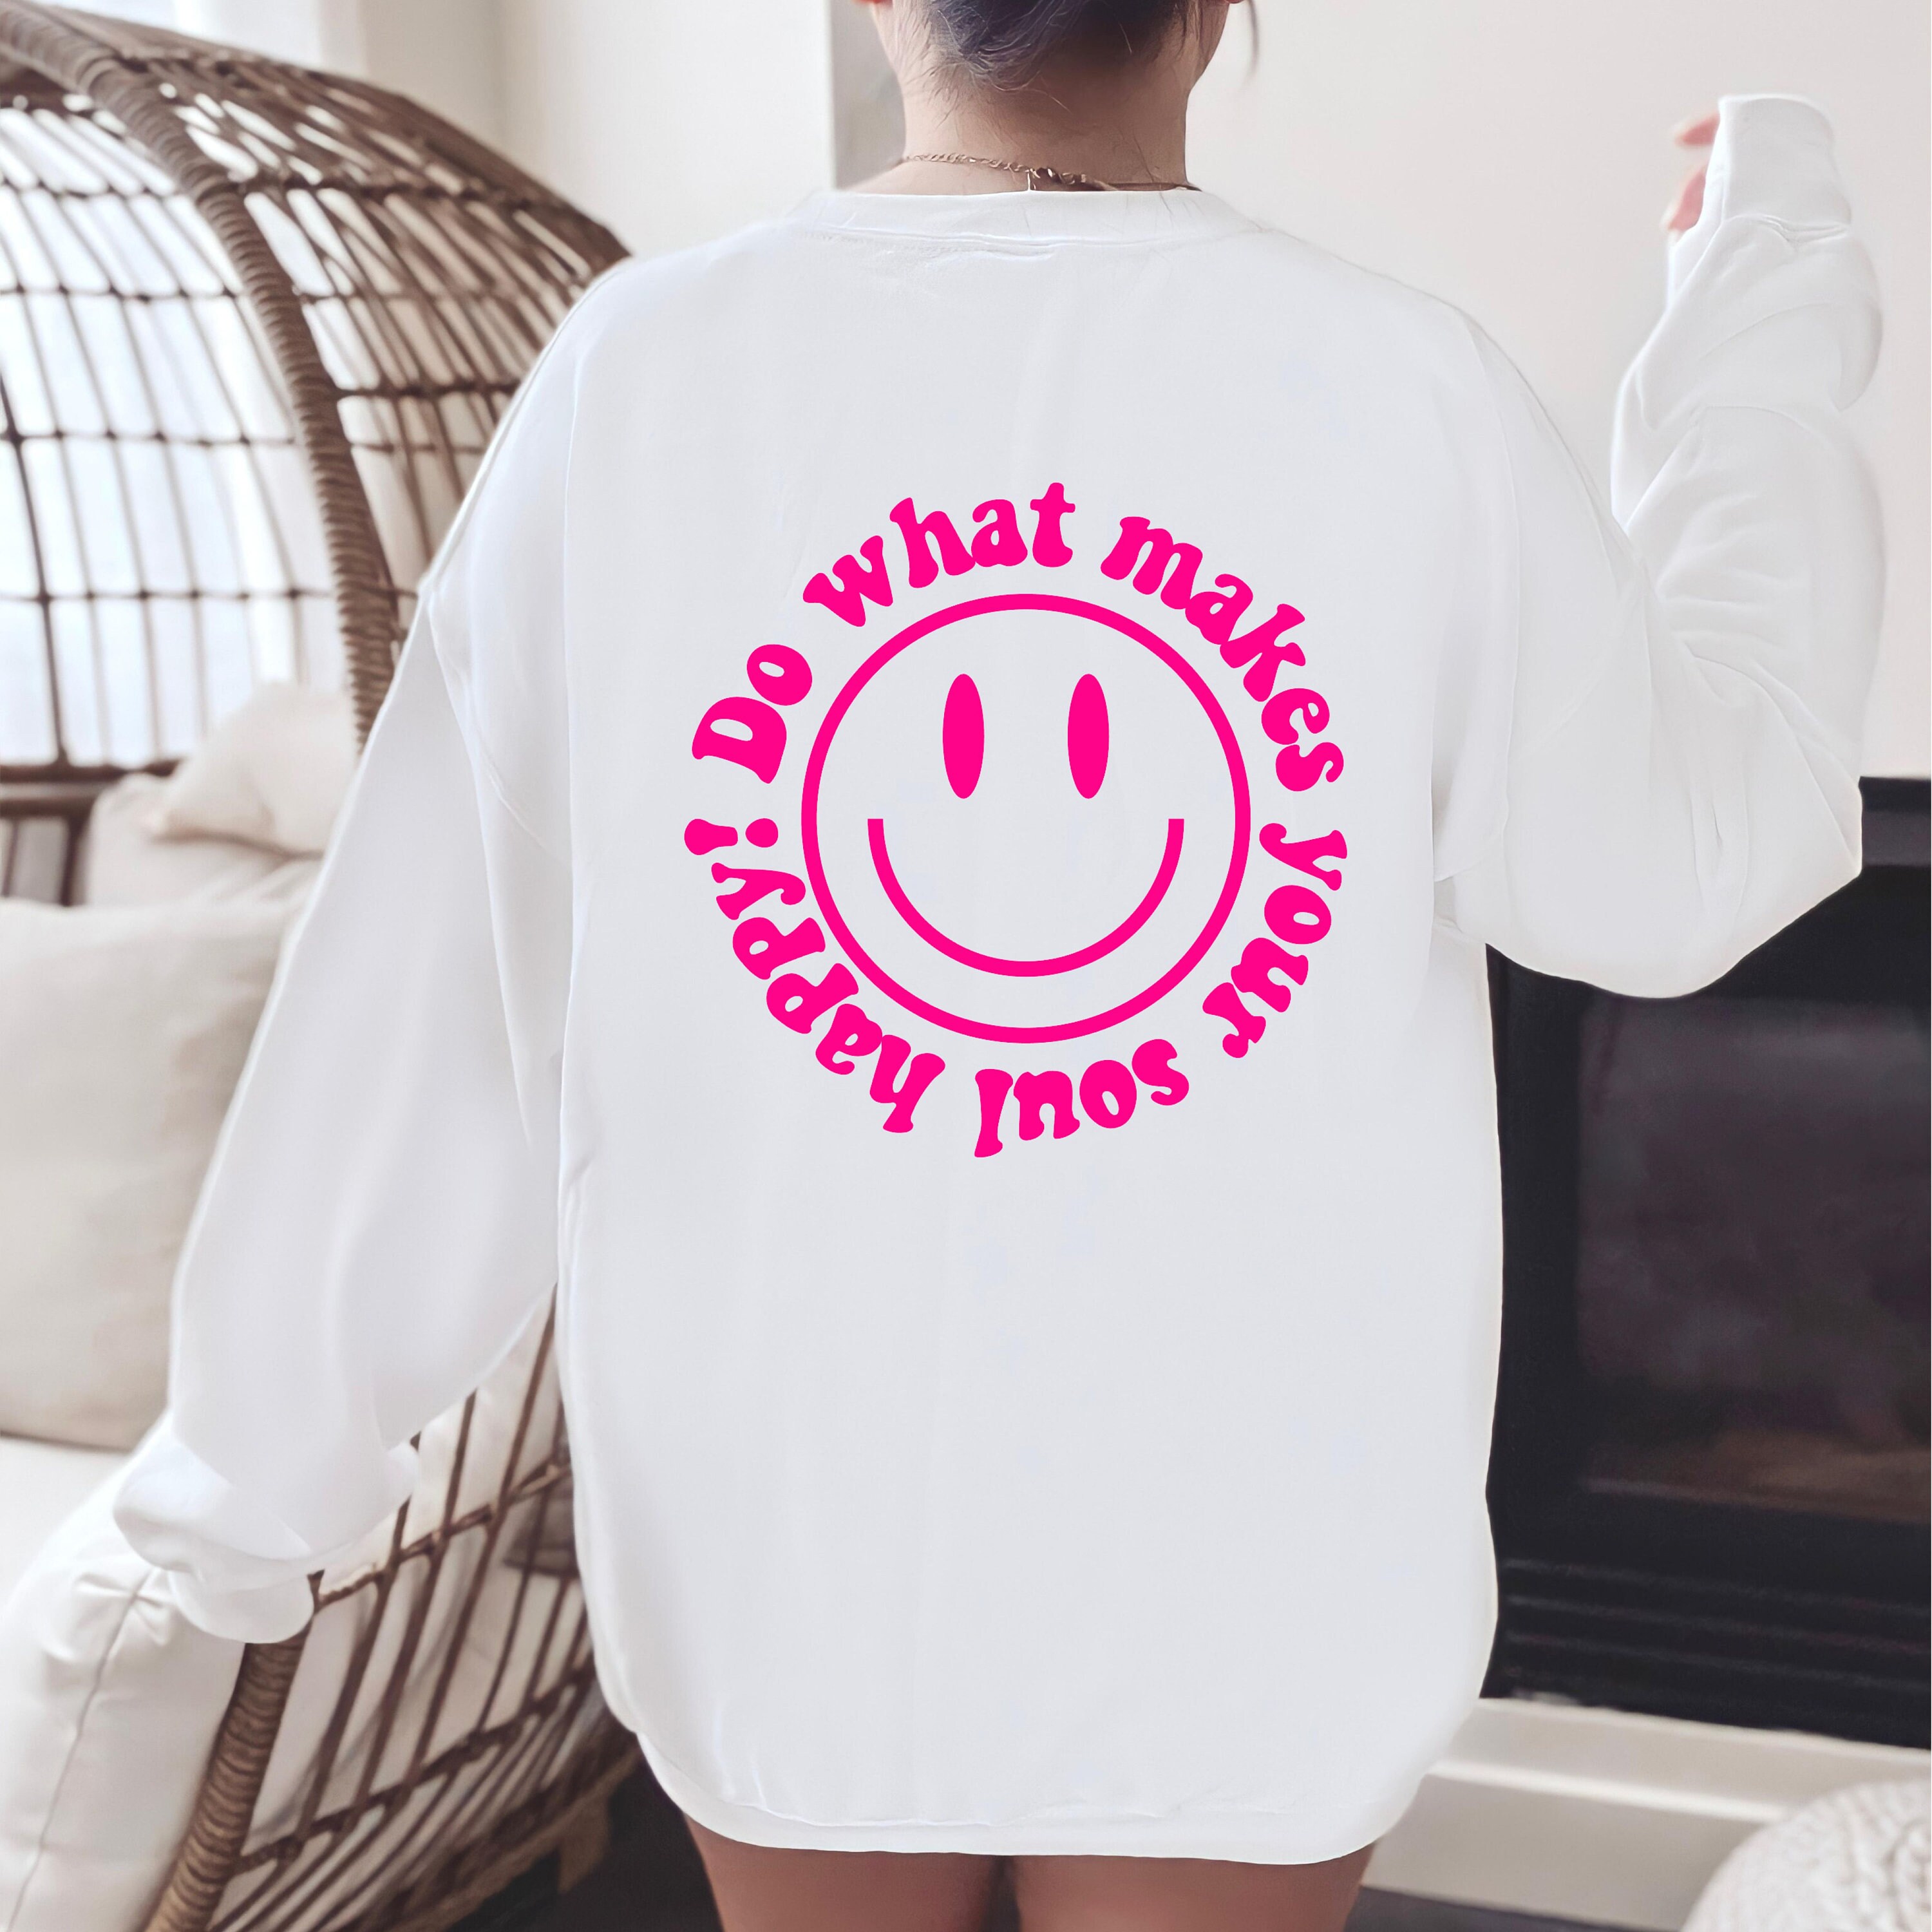 JDEFEG Preppy Clothes for Girls 10-12 Children's Kids Boys Girls Toddler  Cartoon Letters Long Sleeve Sweatshirt Top Outfit Boys 6T Polyester Beige  120